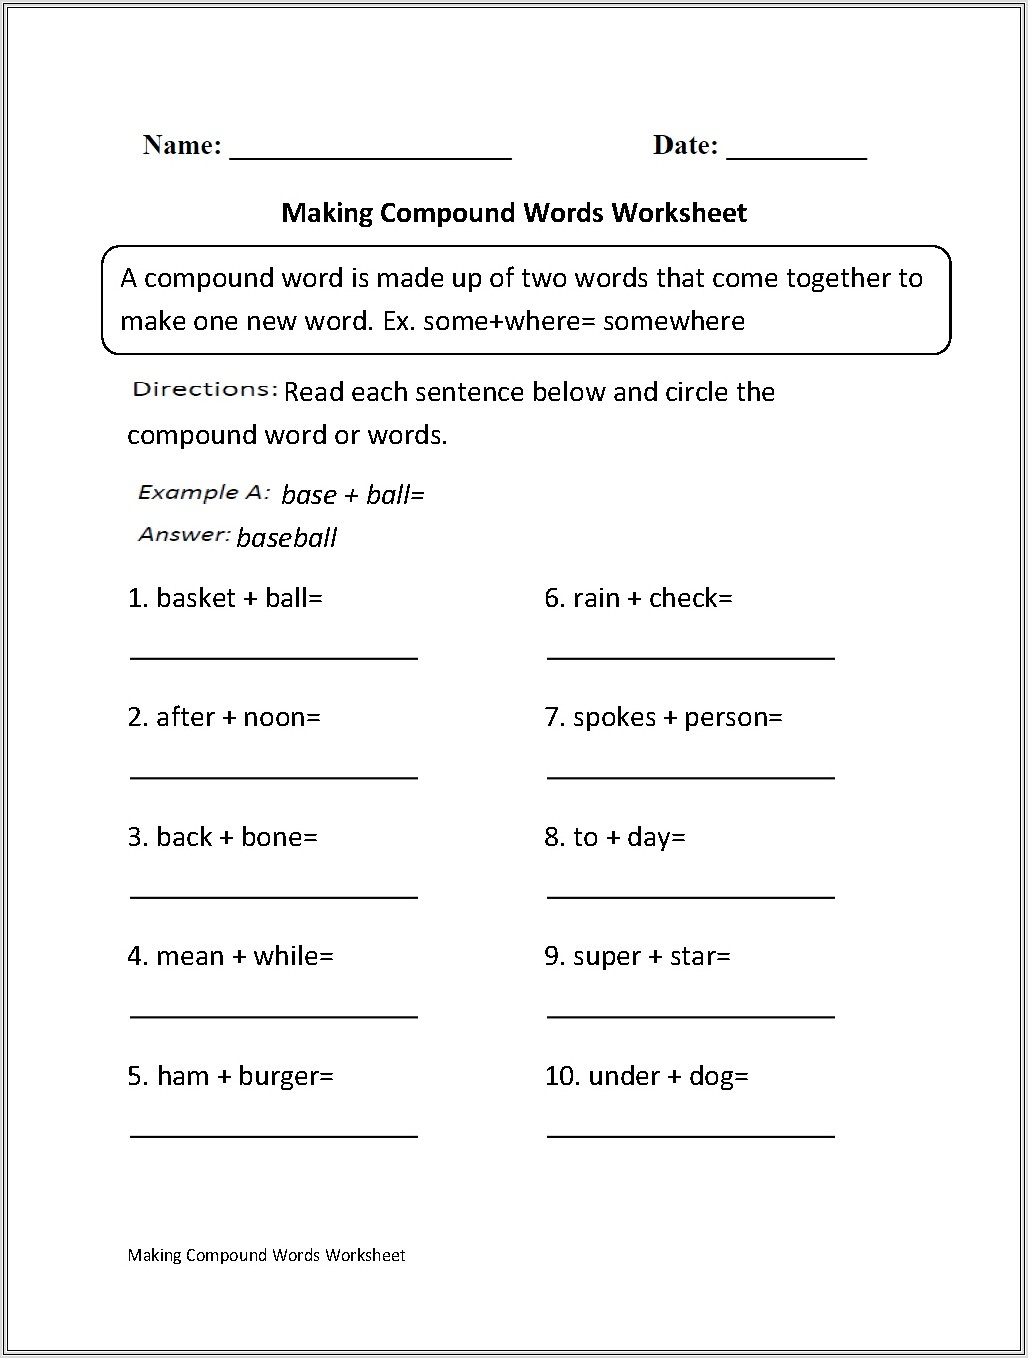 Compound Words Worksheet For 4th Grade